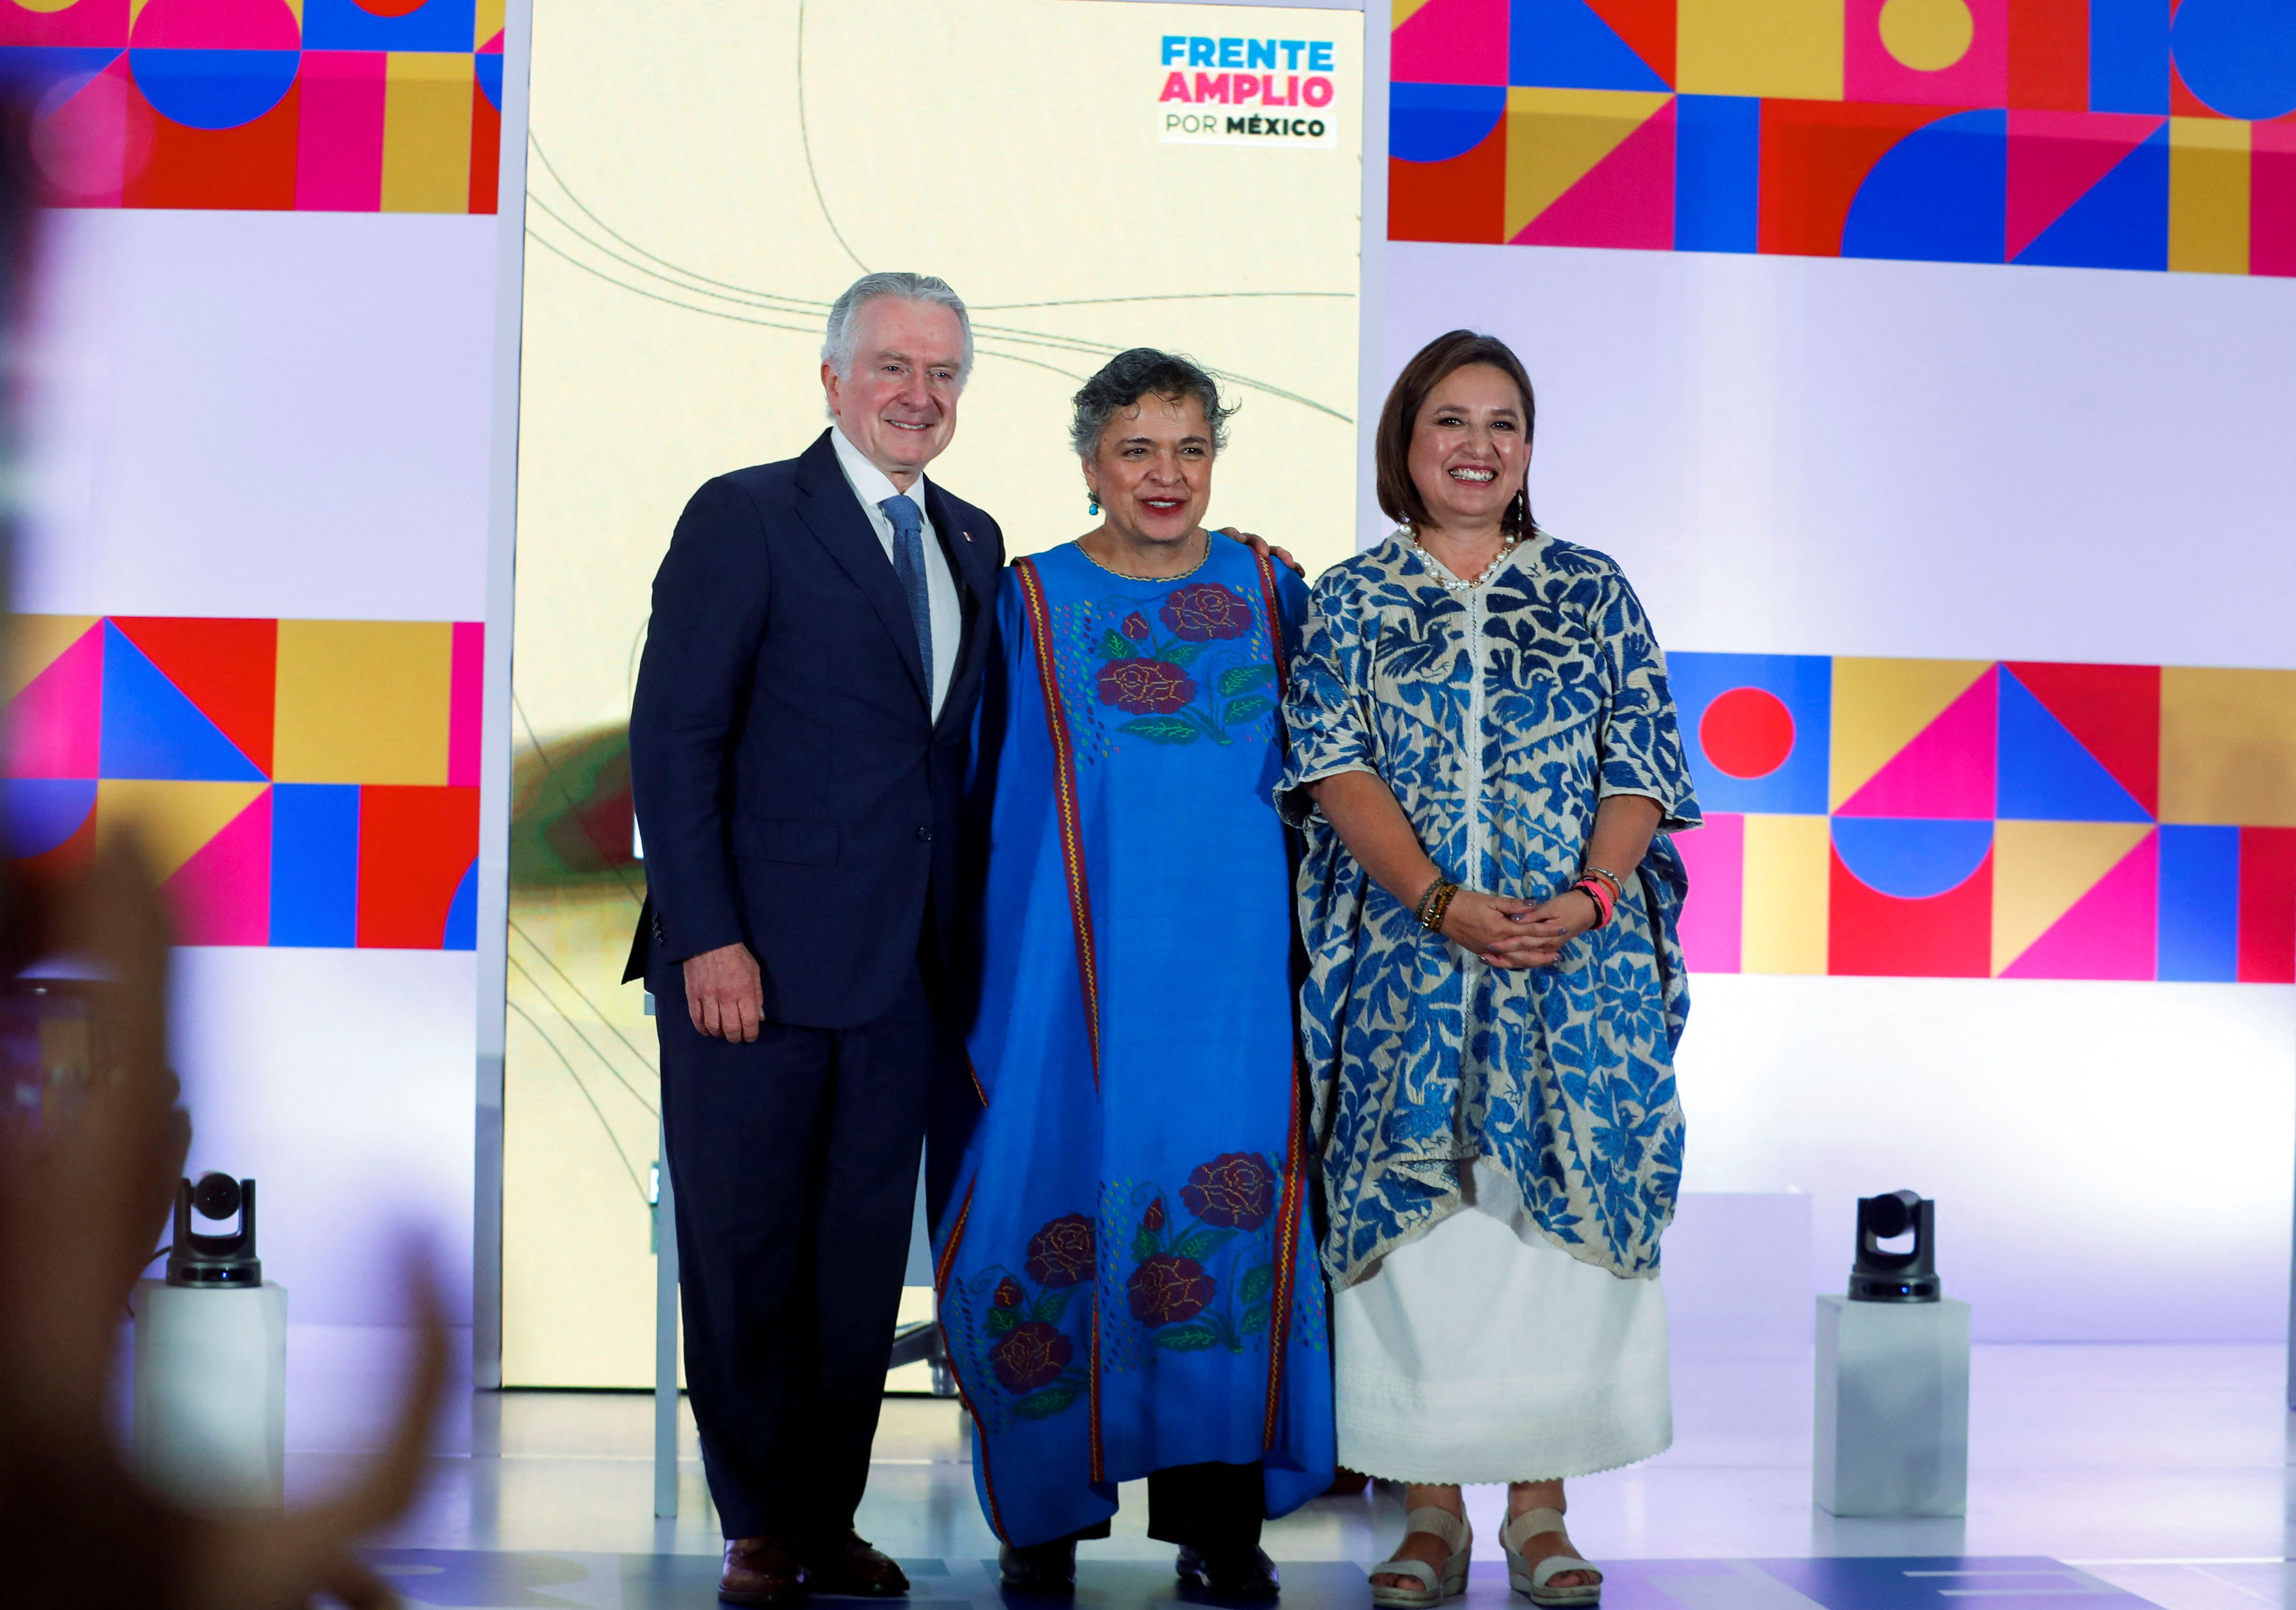 Former Mexican Senator Xochitl Galvez poses for a picture with Santiago Creel and Beatriz Paredes during a private event as she pursues the Frente Amplio por Mexico opposition alliance's candidacy for the 2024 presidential election, in Monterrey, Mexico August 19, 2023. REUTERS/Daniel Becerril